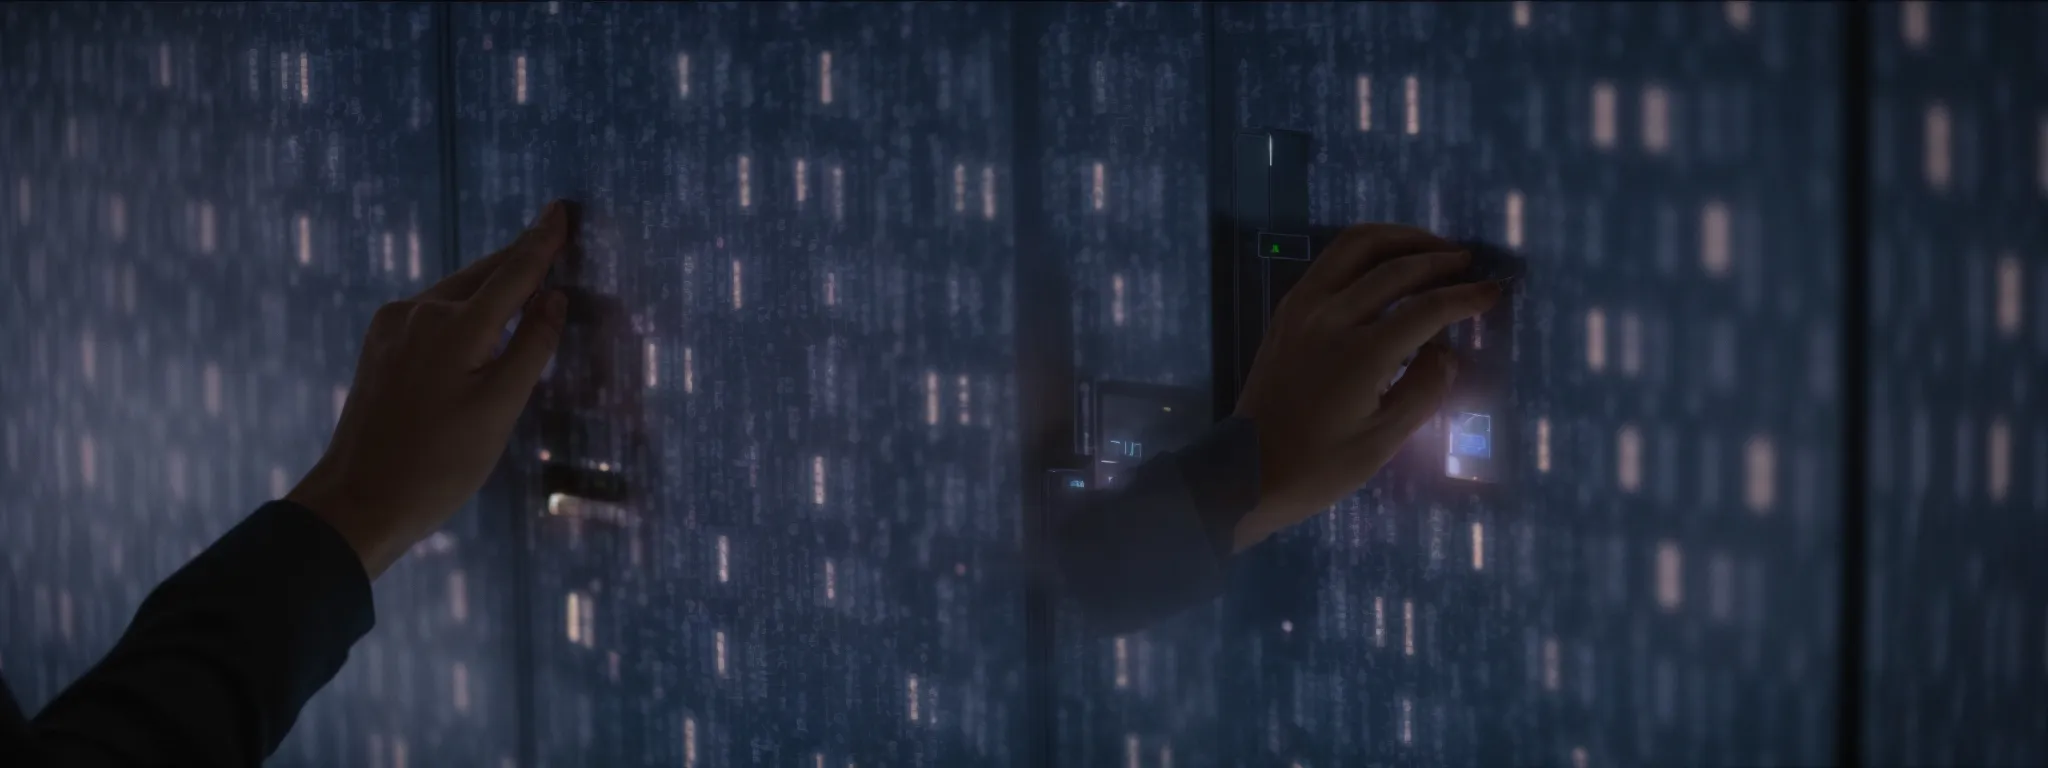 an image of a person confidently adjusting a digital security firewall to protect a computer screen displaying 5-star ratings.